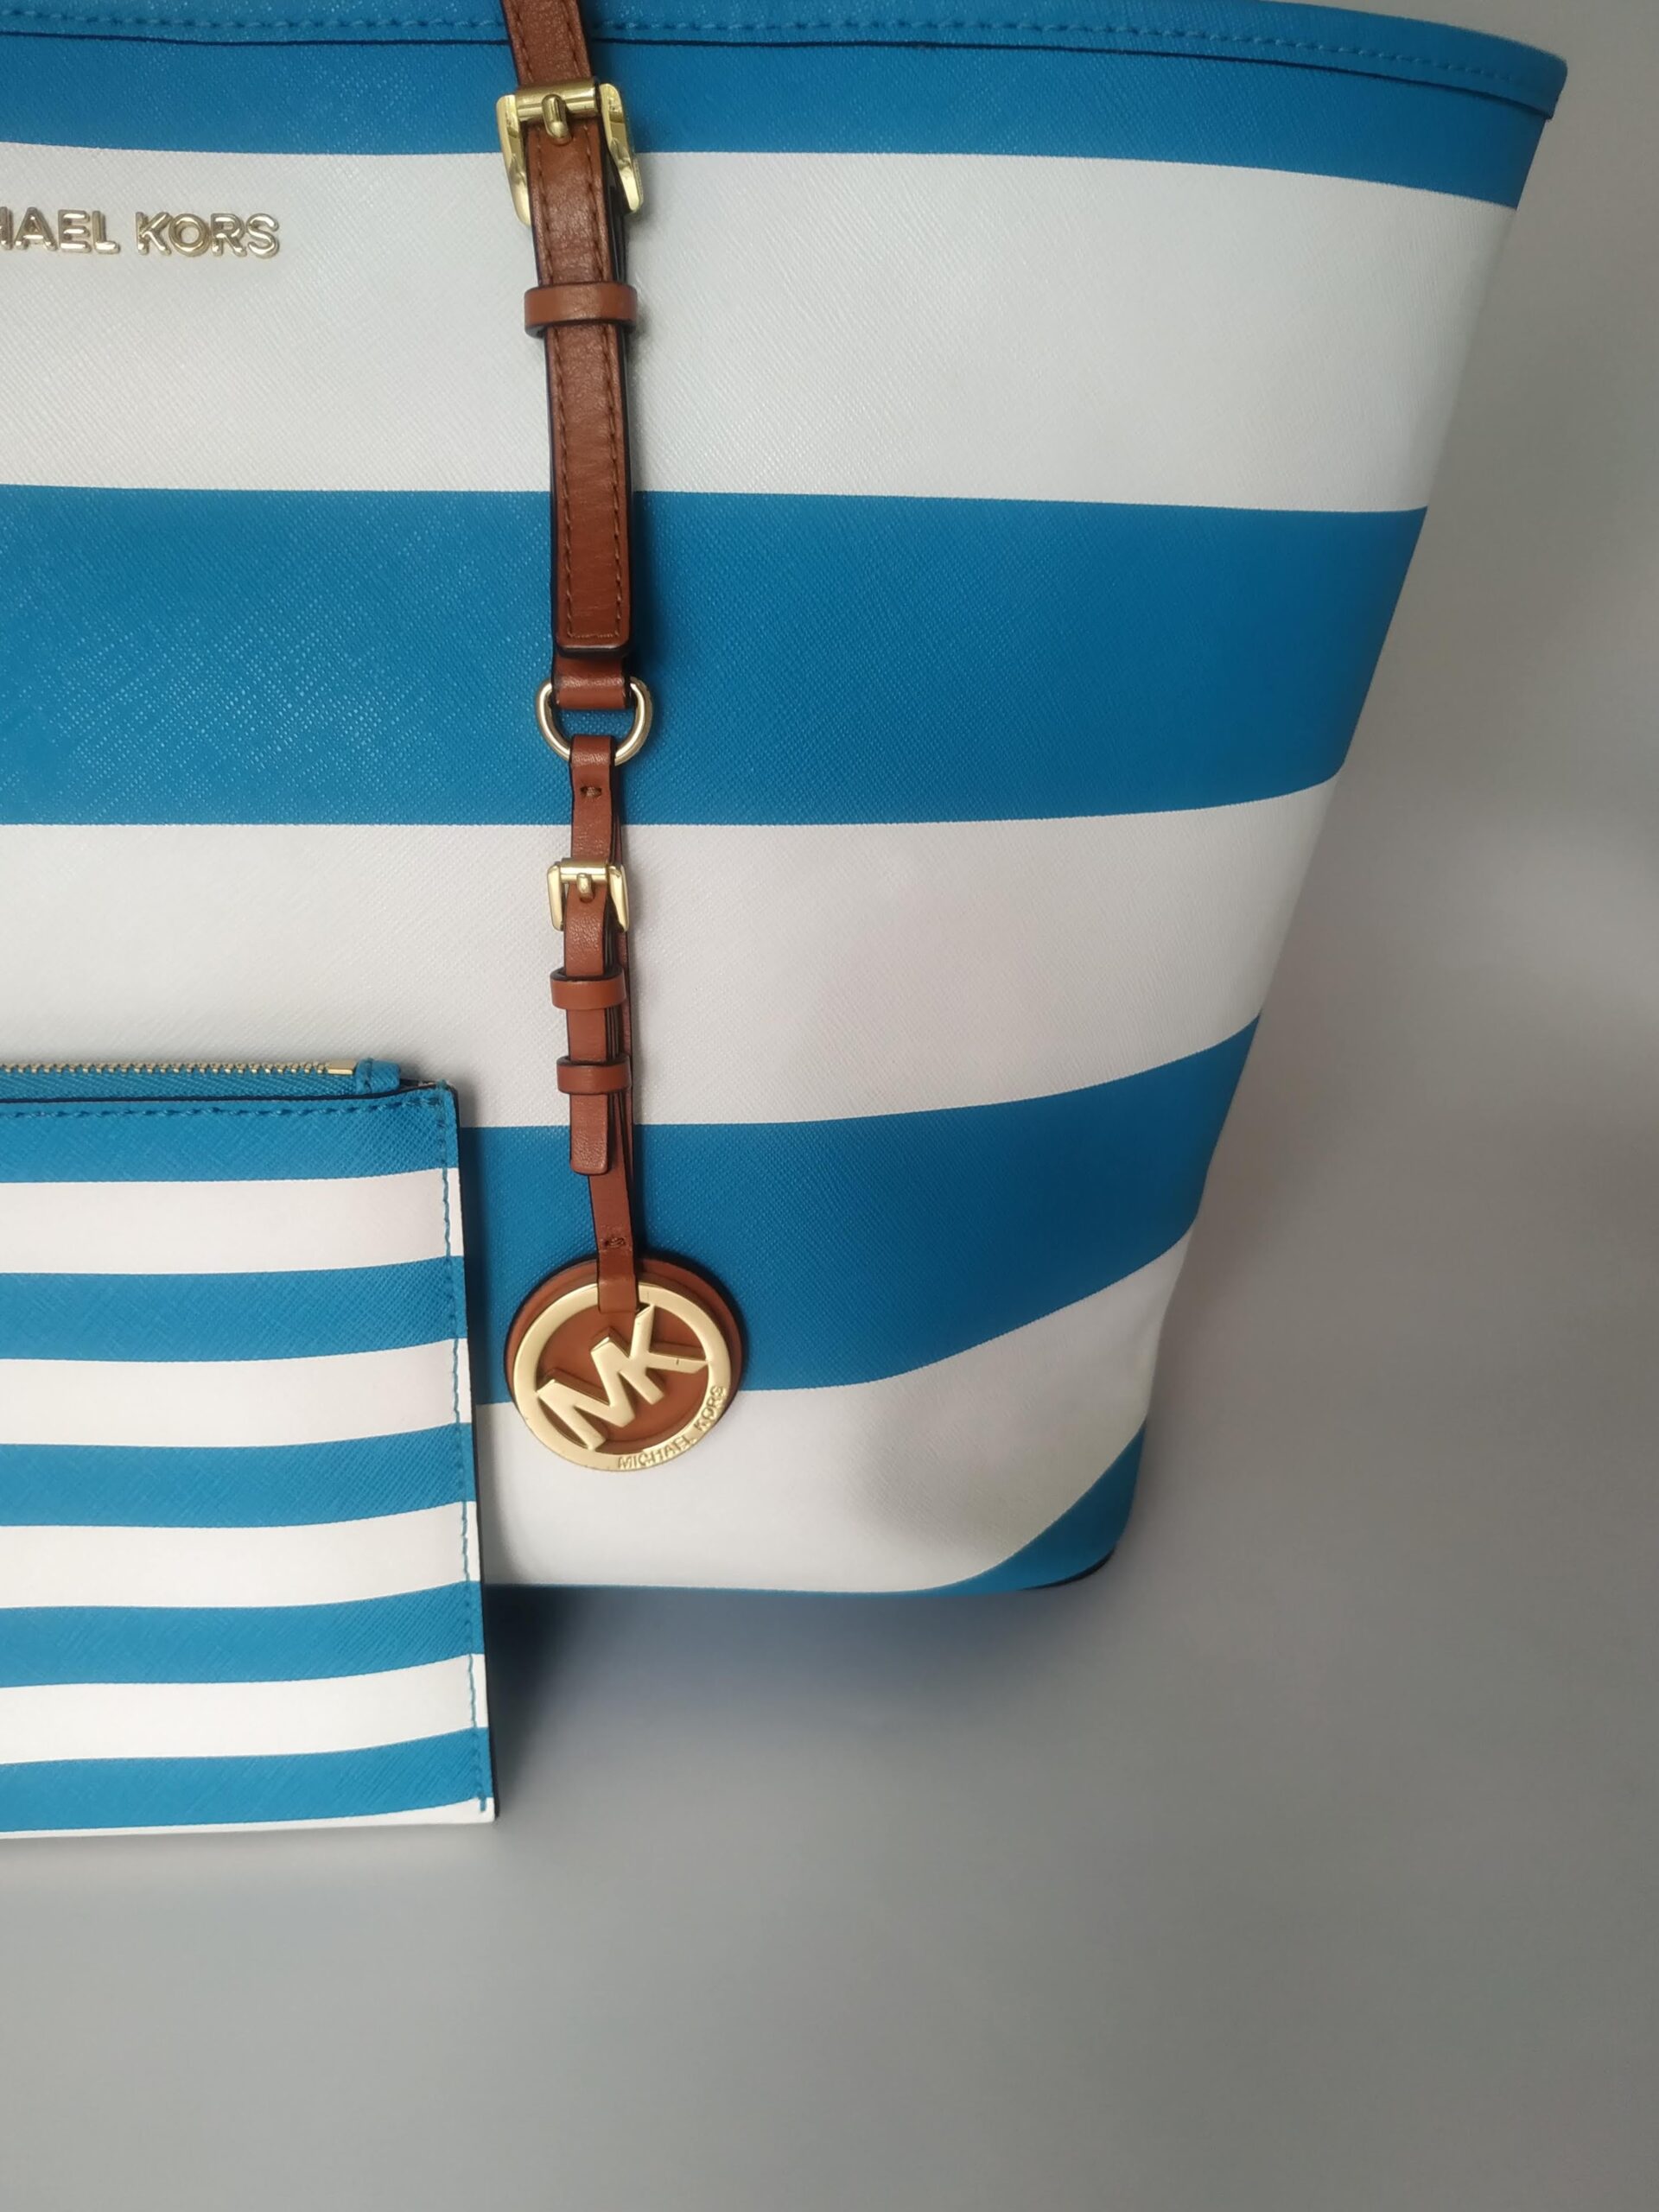 Michael Kors Large Bright Blue & White Jet Set Bag + Wristlet in Saffiano  Leather - Earth Luxury